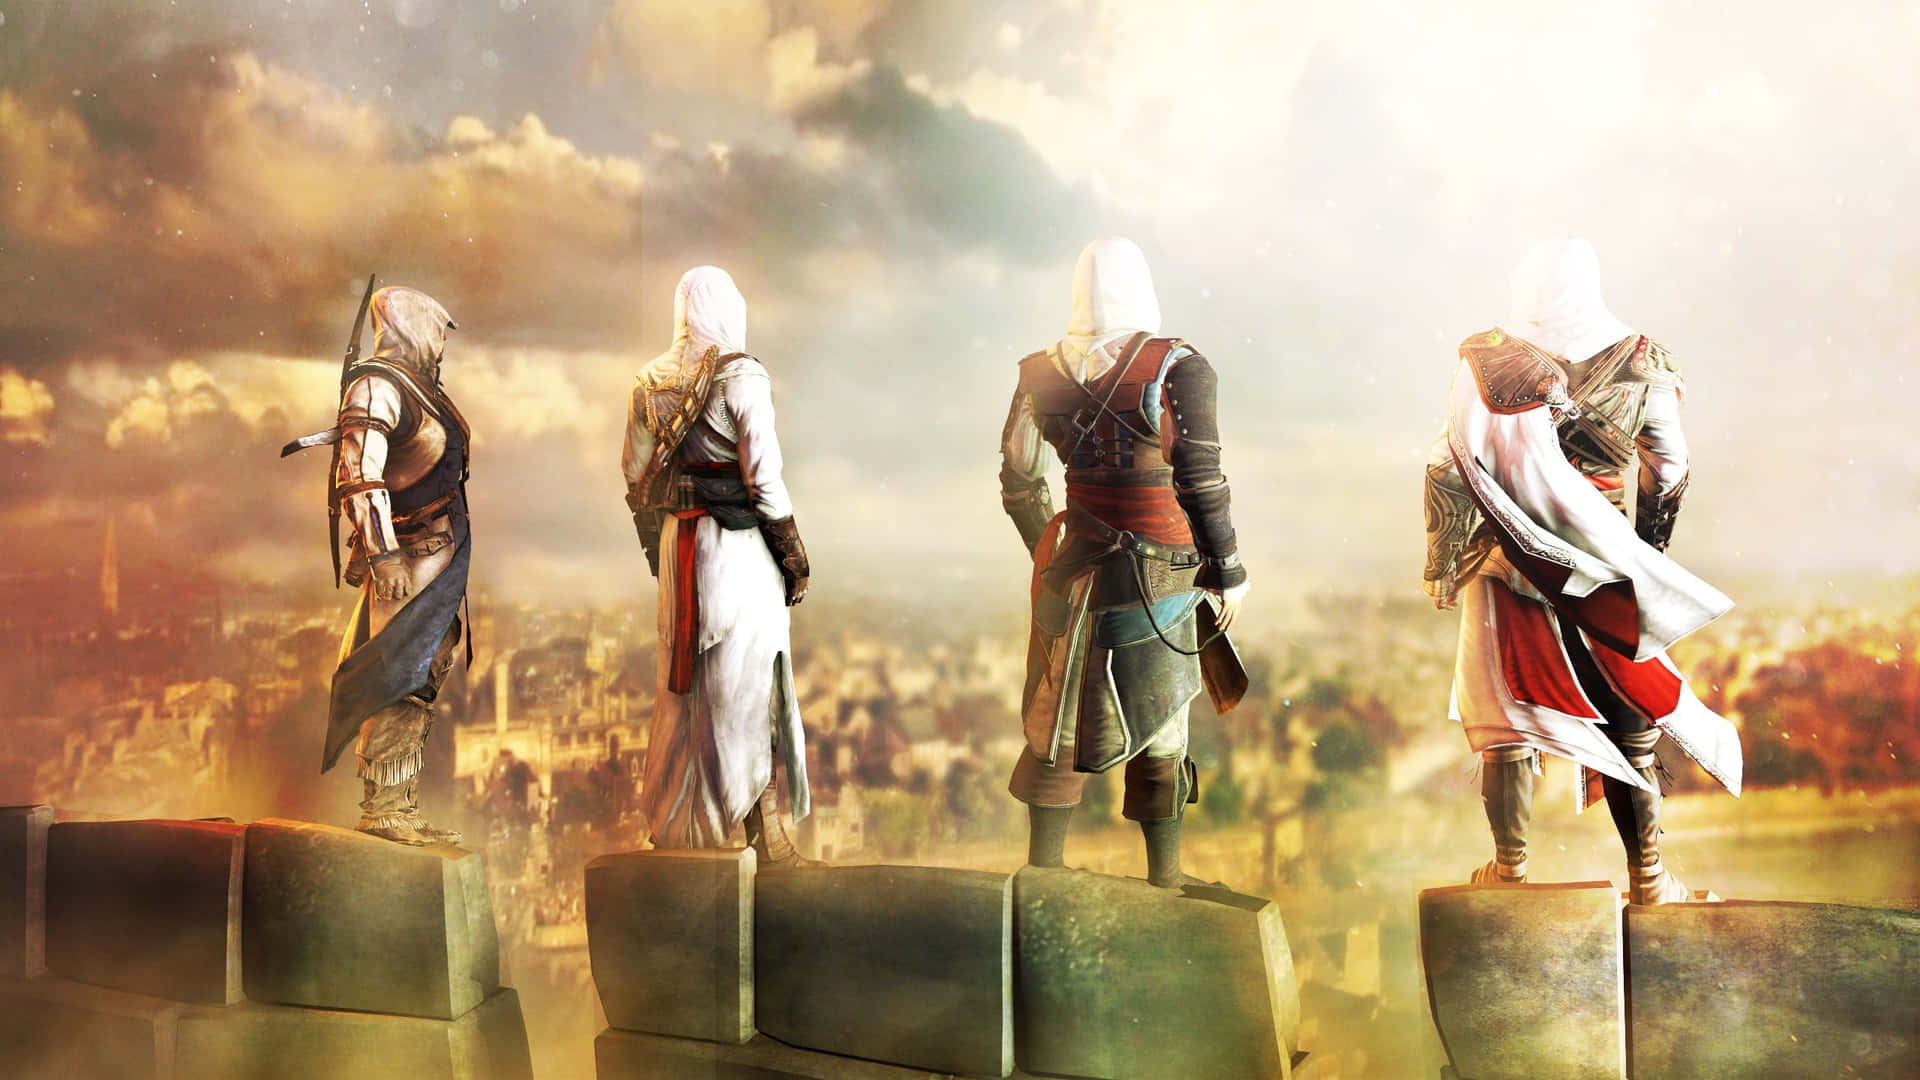 Altair stealthily perched on a building in Jerusalem Wallpaper